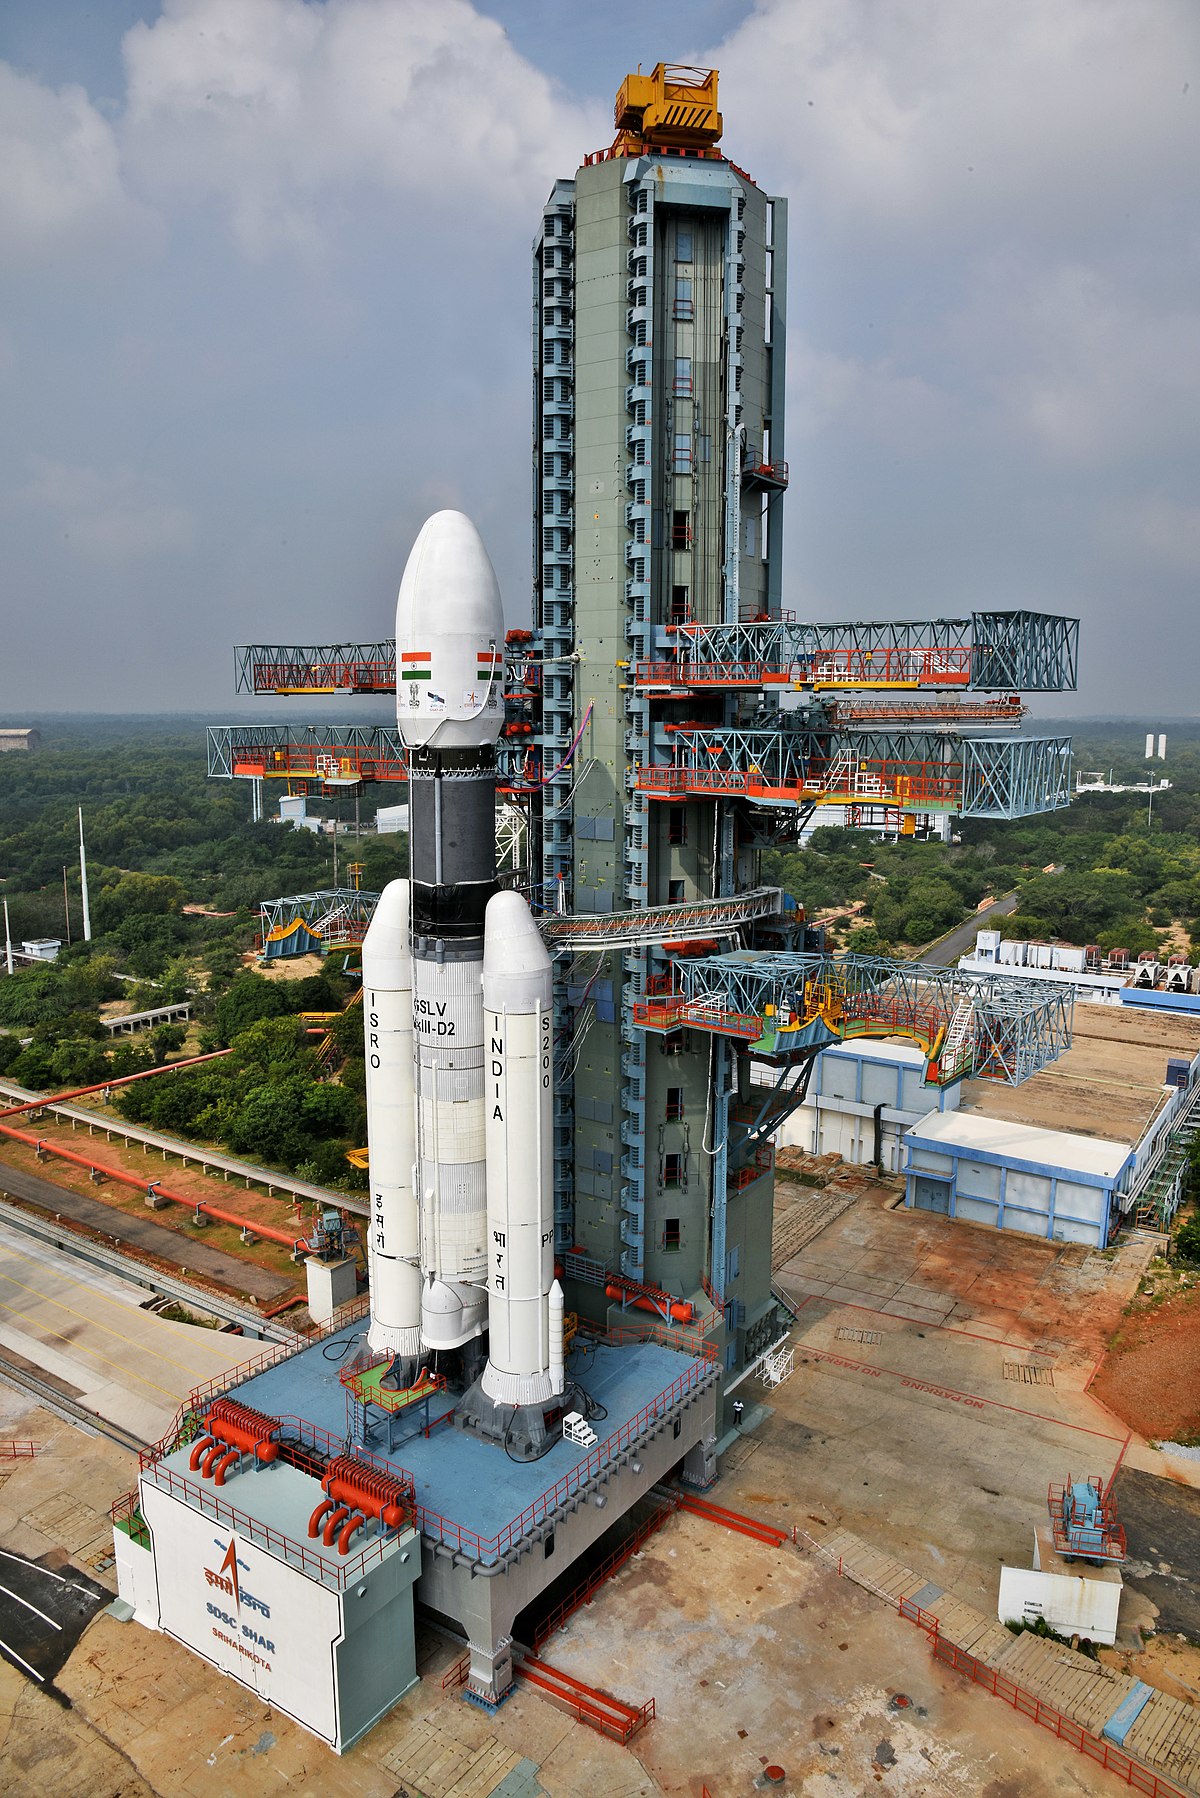 File:GSLV Mk III D2 on Second Launch Pad of Satish Dhawan ...